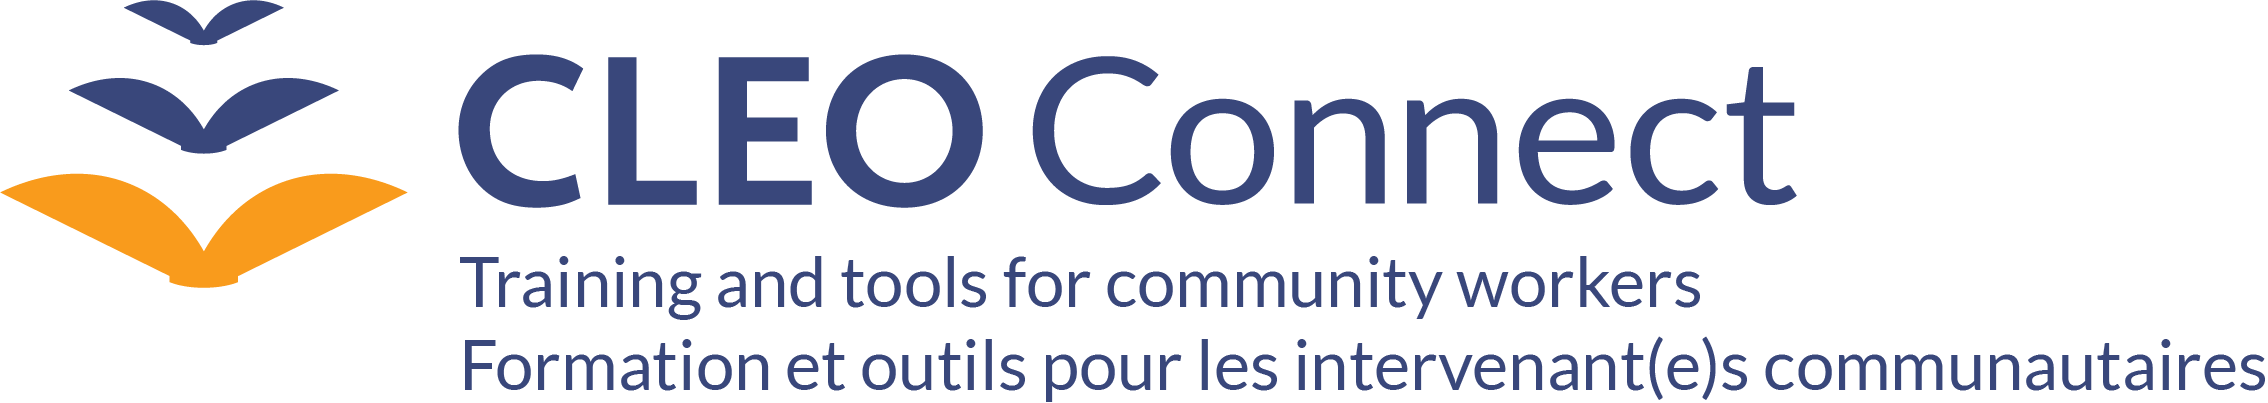 CLEO Connect logo and slogan